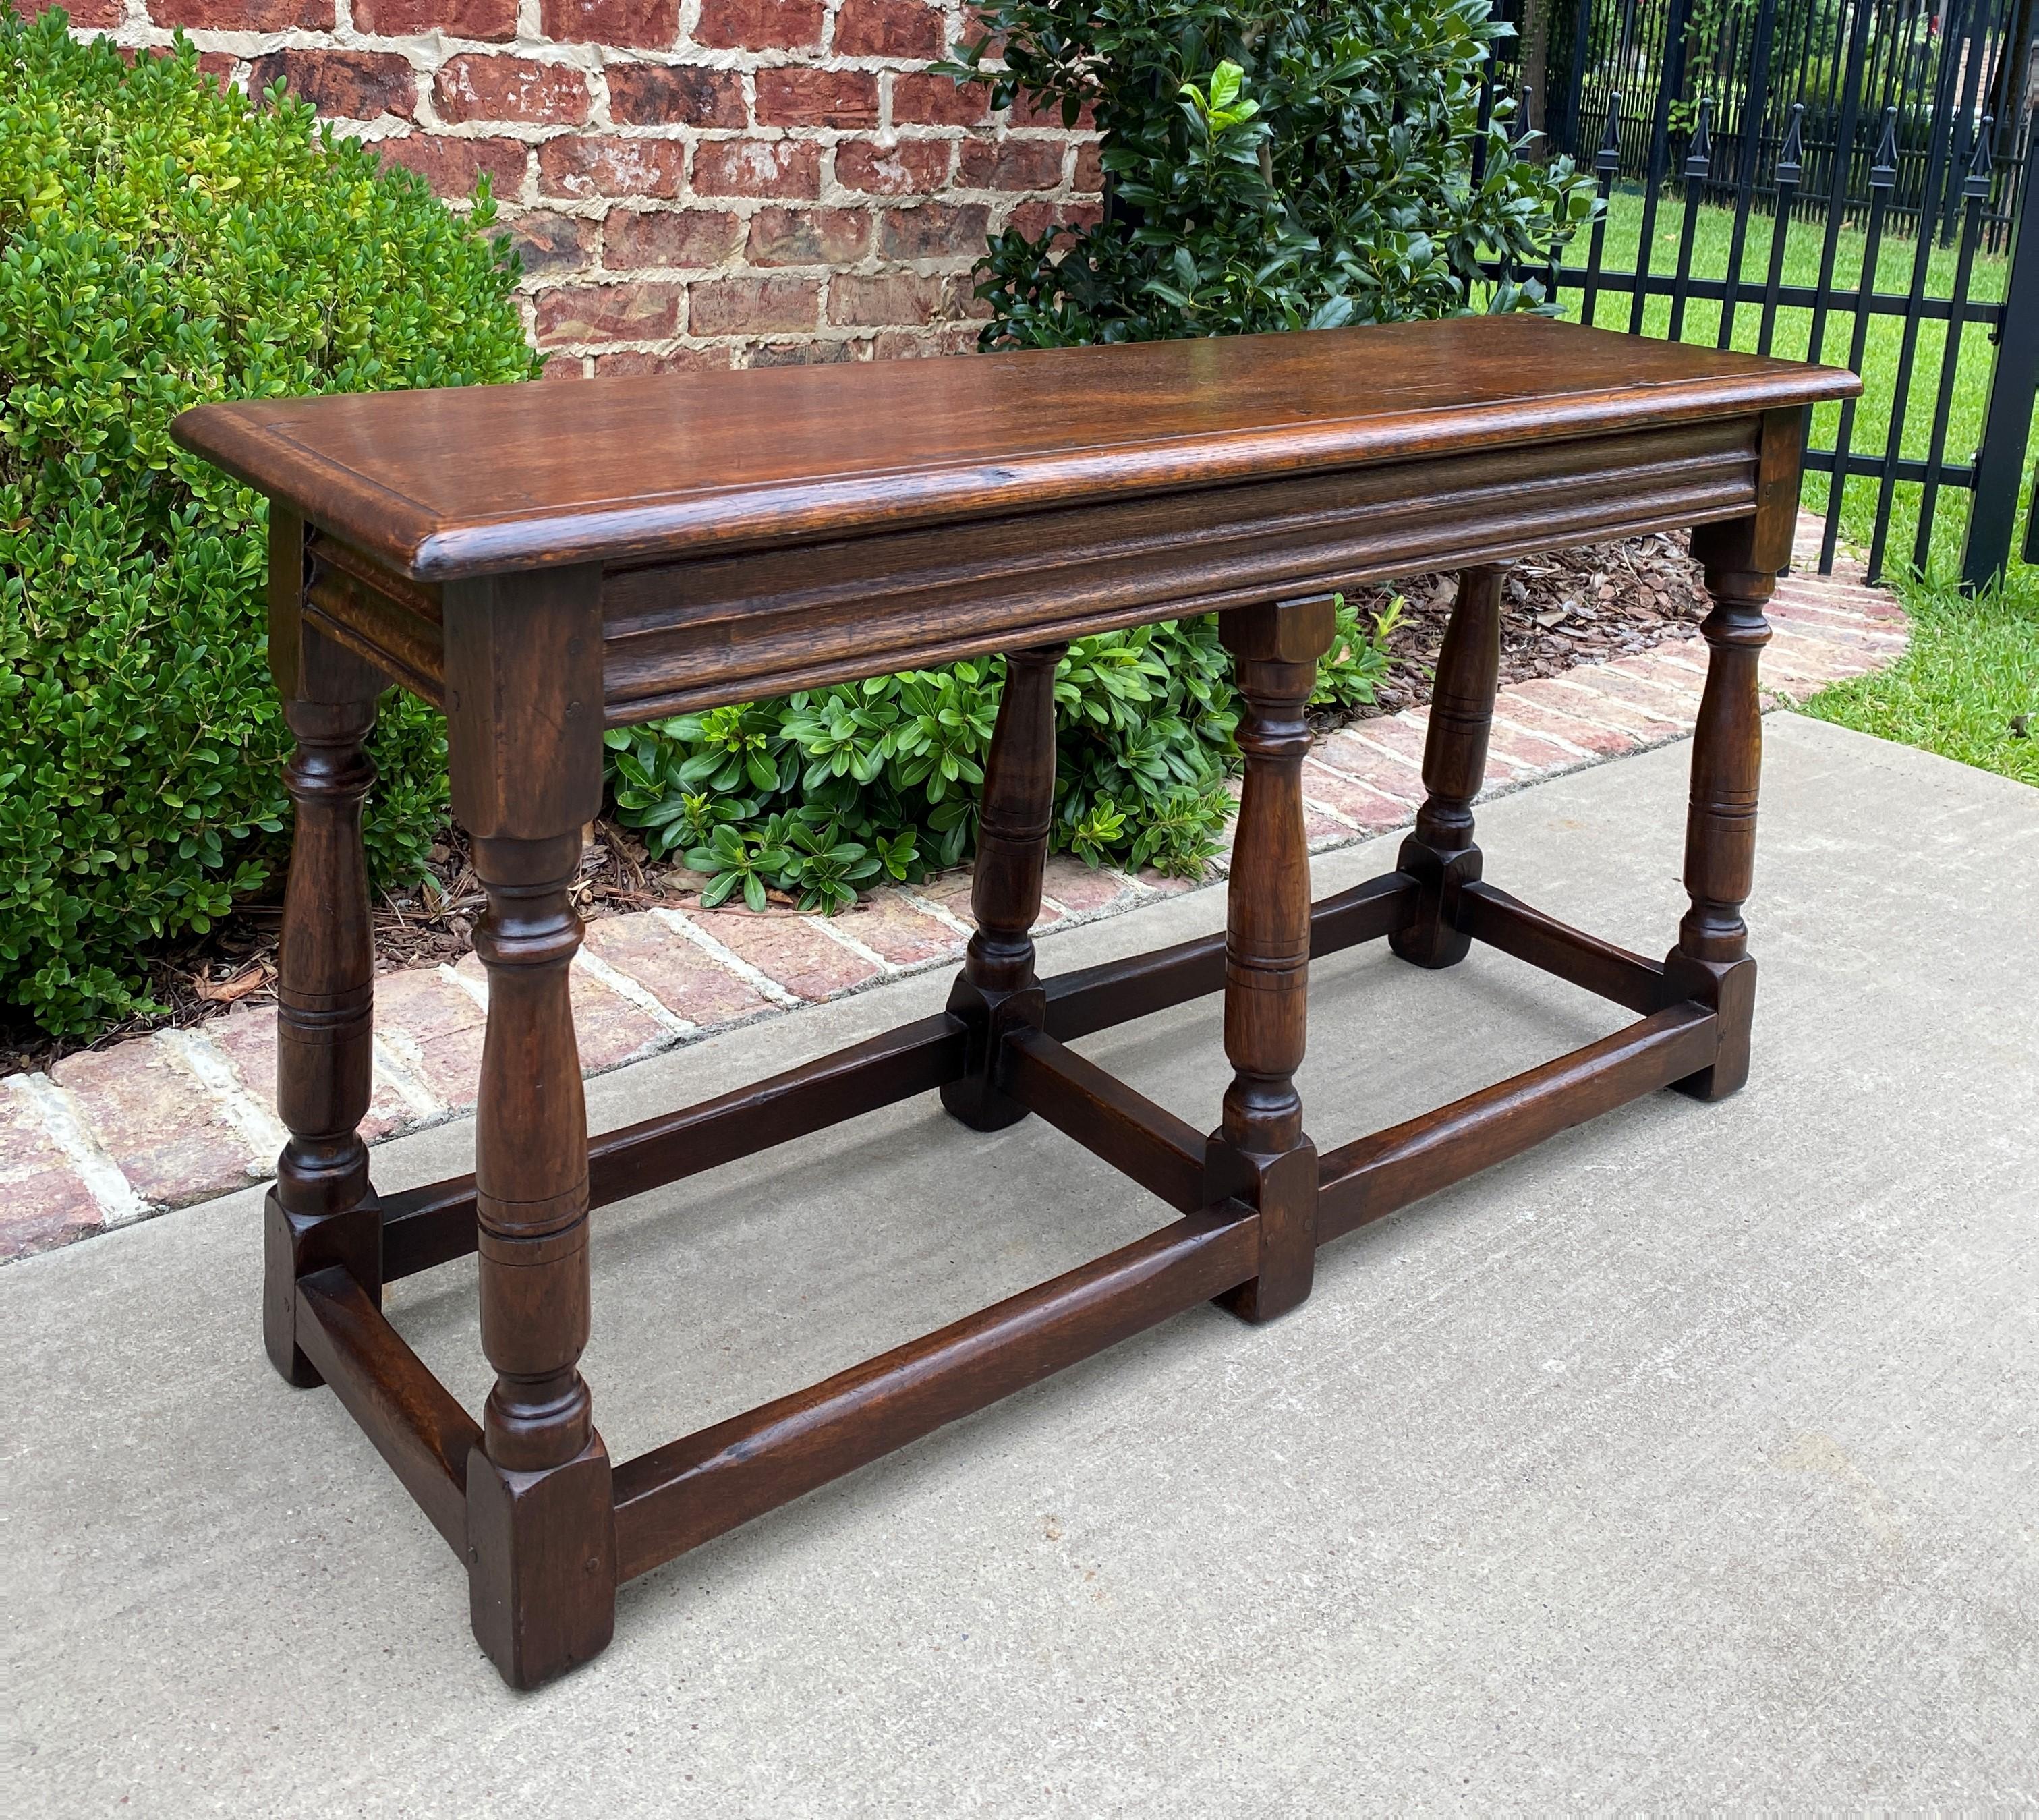 Arts and Crafts Antique English Bench Stool Pegged Turned Post Oak Window Seat Narrow Depth